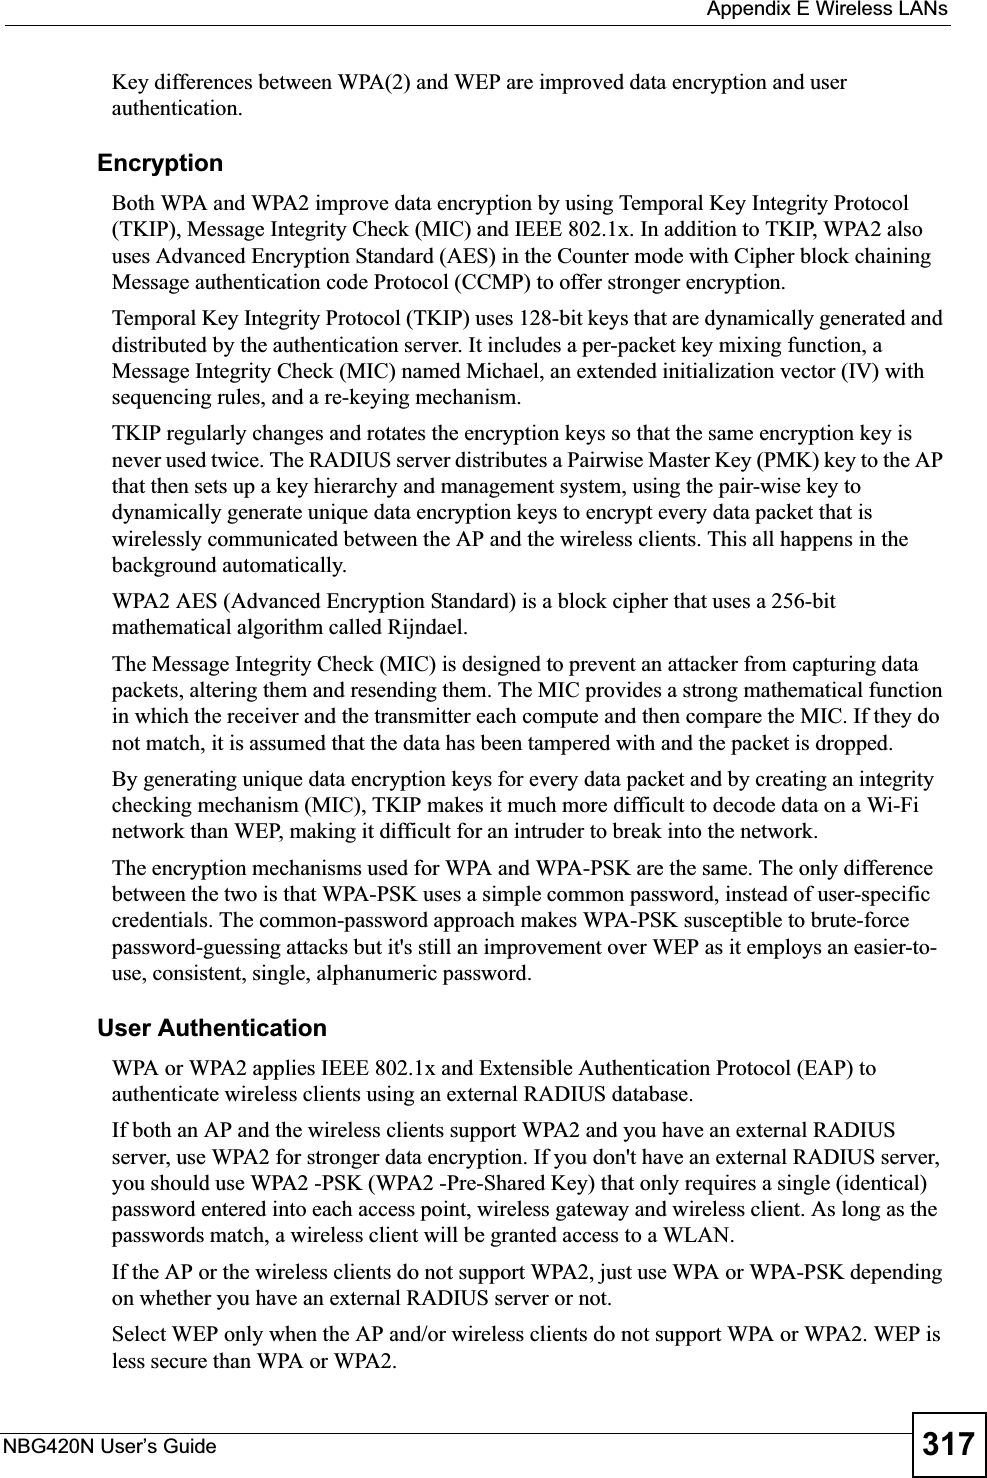  Appendix E Wireless LANsNBG420N User’s Guide 317Key differences between WPA(2) and WEP are improved data encryption and user authentication.    EncryptionBoth WPA and WPA2 improve data encryption by using Temporal Key Integrity Protocol (TKIP), Message Integrity Check (MIC) and IEEE 802.1x. In addition to TKIP, WPA2 also uses Advanced Encryption Standard (AES) in the Counter mode with Cipher block chaining Message authentication code Protocol (CCMP) to offer stronger encryption. Temporal Key Integrity Protocol (TKIP) uses 128-bit keys that are dynamically generated and distributed by the authentication server. It includes a per-packet key mixing function, a Message Integrity Check (MIC) named Michael, an extended initialization vector (IV) with sequencing rules, and a re-keying mechanism.TKIP regularly changes and rotates the encryption keys so that the same encryption key is never used twice. The RADIUS server distributes a Pairwise Master Key (PMK) key to the AP that then sets up a key hierarchy and management system, using the pair-wise key to dynamically generate unique data encryption keys to encrypt every data packet that is wirelessly communicated between the AP and the wireless clients. This all happens in the background automatically.WPA2 AES (Advanced Encryption Standard) is a block cipher that uses a 256-bit mathematical algorithm called Rijndael.The Message Integrity Check (MIC) is designed to prevent an attacker from capturing data packets, altering them and resending them. The MIC provides a strong mathematical function in which the receiver and the transmitter each compute and then compare the MIC. If they do not match, it is assumed that the data has been tampered with and the packet is dropped. By generating unique data encryption keys for every data packet and by creating an integrity checking mechanism (MIC), TKIP makes it much more difficult to decode data on a Wi-Fi network than WEP, making it difficult for an intruder to break into the network. The encryption mechanisms used for WPA and WPA-PSK are the same. The only difference between the two is that WPA-PSK uses a simple common password, instead of user-specific credentials. The common-password approach makes WPA-PSK susceptible to brute-force password-guessing attacks but it&apos;s still an improvement over WEP as it employs an easier-to-use, consistent, single, alphanumeric password.  User AuthenticationWPA or WPA2 applies IEEE 802.1x and Extensible Authentication Protocol (EAP) to authenticate wireless clients using an external RADIUS database. If both an AP and the wireless clients support WPA2 and you have an external RADIUS server, use WPA2 for stronger data encryption. If you don&apos;t have an external RADIUS server, you should use WPA2 -PSK (WPA2 -Pre-Shared Key) that only requires a single (identical) password entered into each access point, wireless gateway and wireless client. As long as the passwords match, a wireless client will be granted access to a WLAN. If the AP or the wireless clients do not support WPA2, just use WPA or WPA-PSK depending on whether you have an external RADIUS server or not.Select WEP only when the AP and/or wireless clients do not support WPA or WPA2. WEP is less secure than WPA or WPA2.